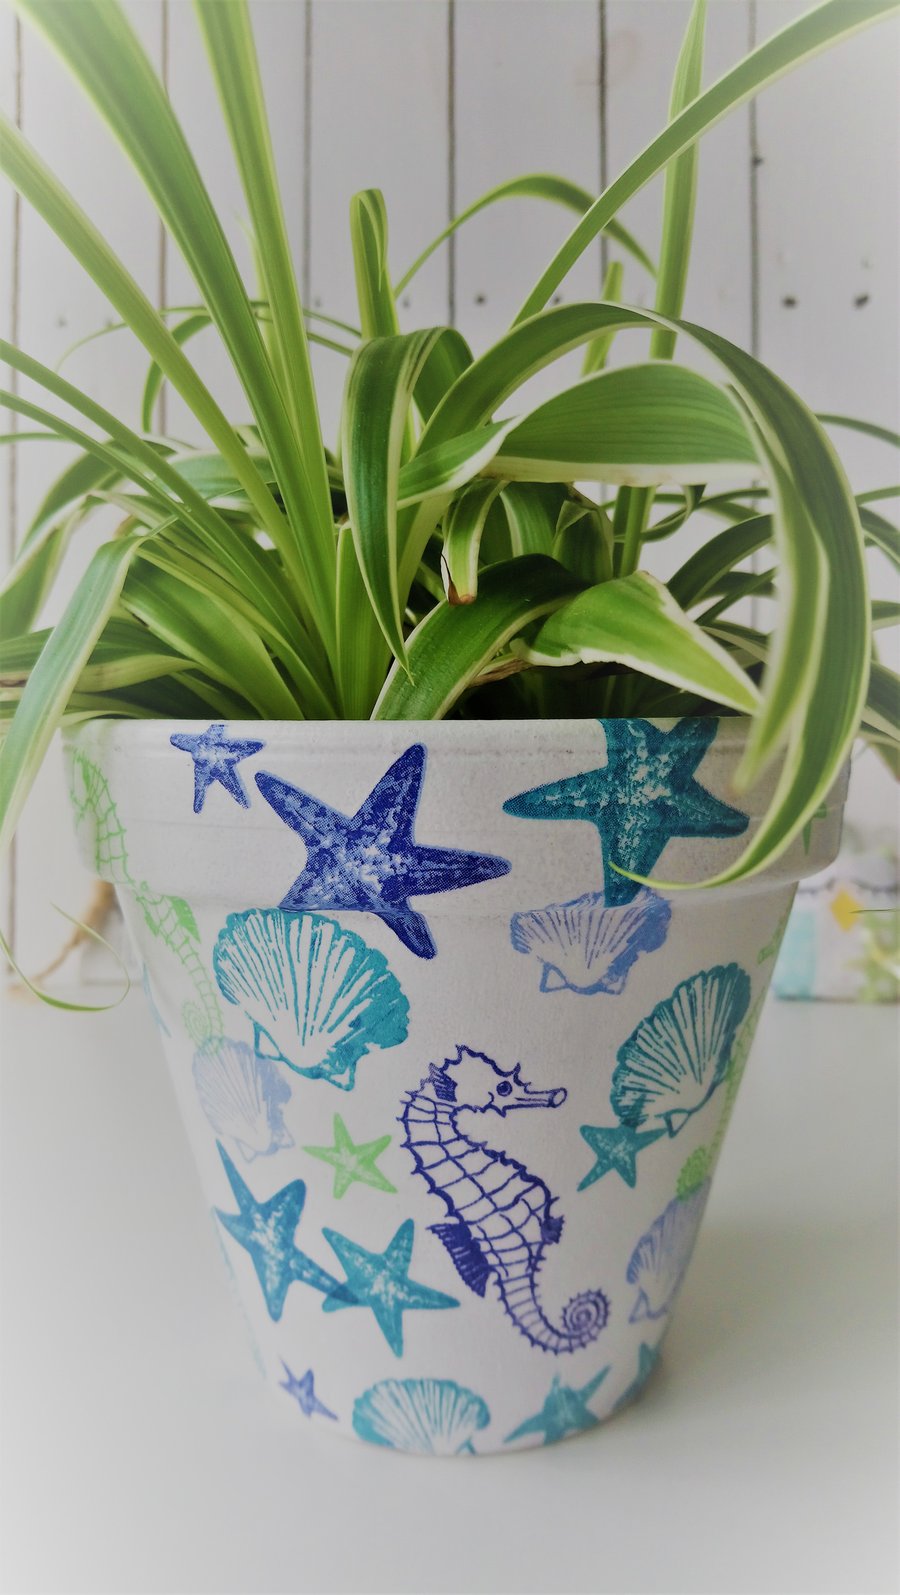 MADE TO ORDER - Decoupaged Sea Life Design Indoor Terracotta Pot